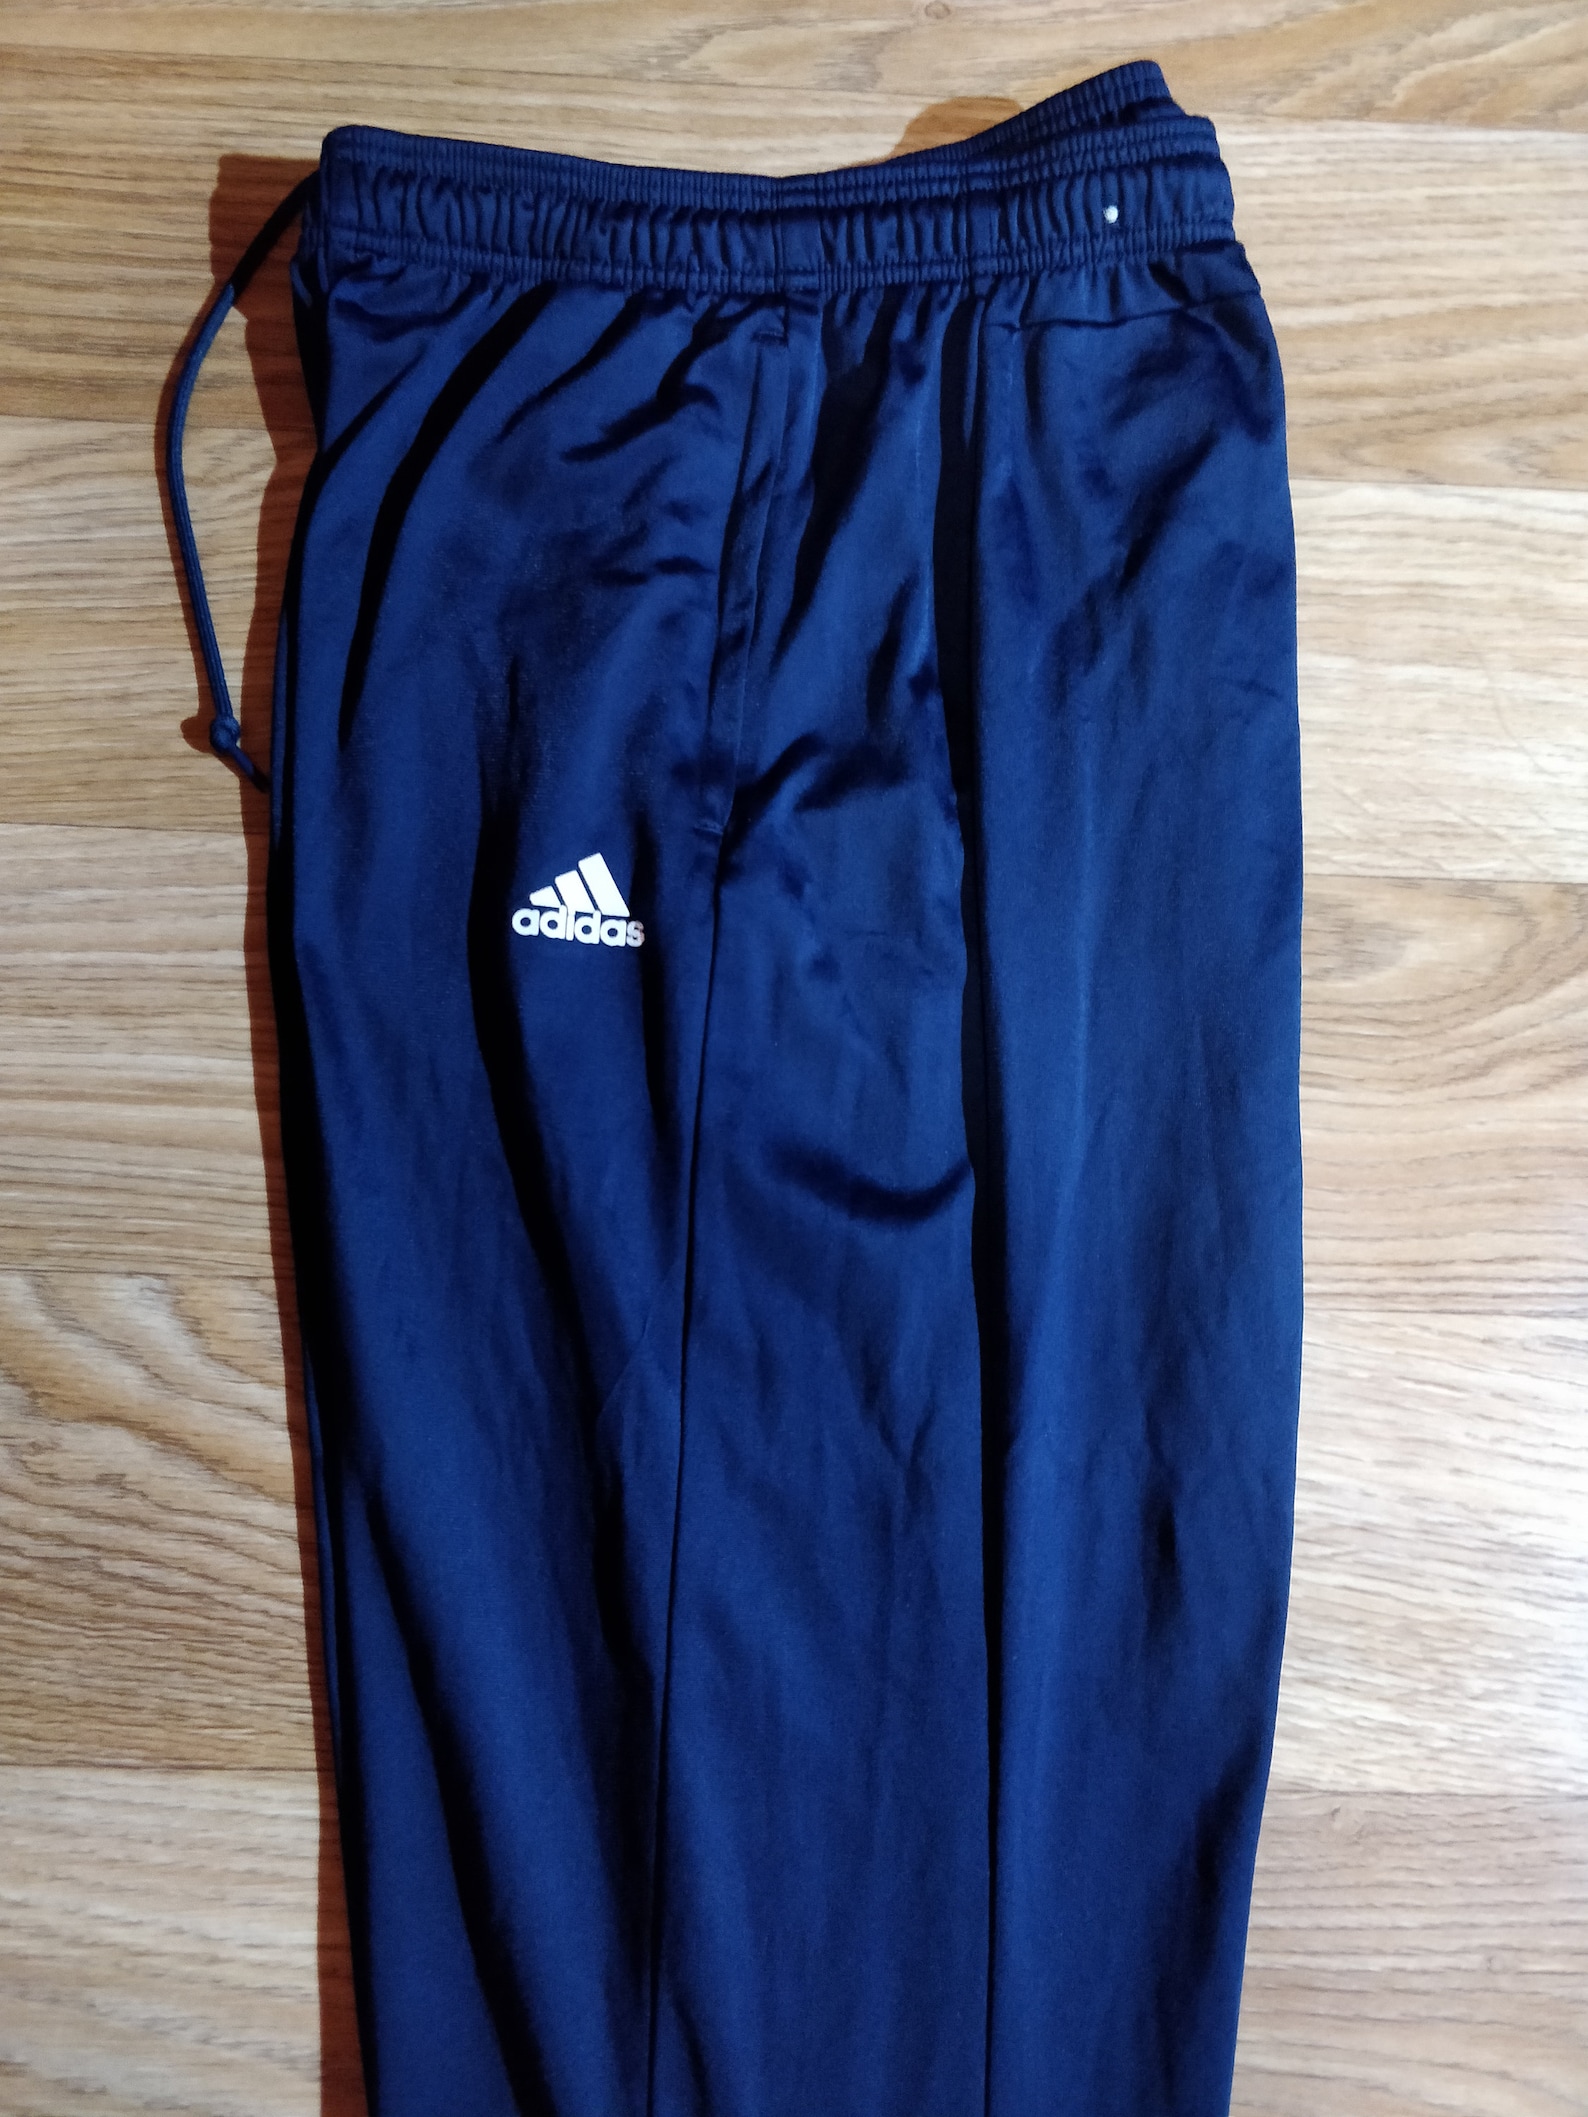 Adidas Mens Tracksuit Pants Trousers Training Navy Blue White | Etsy